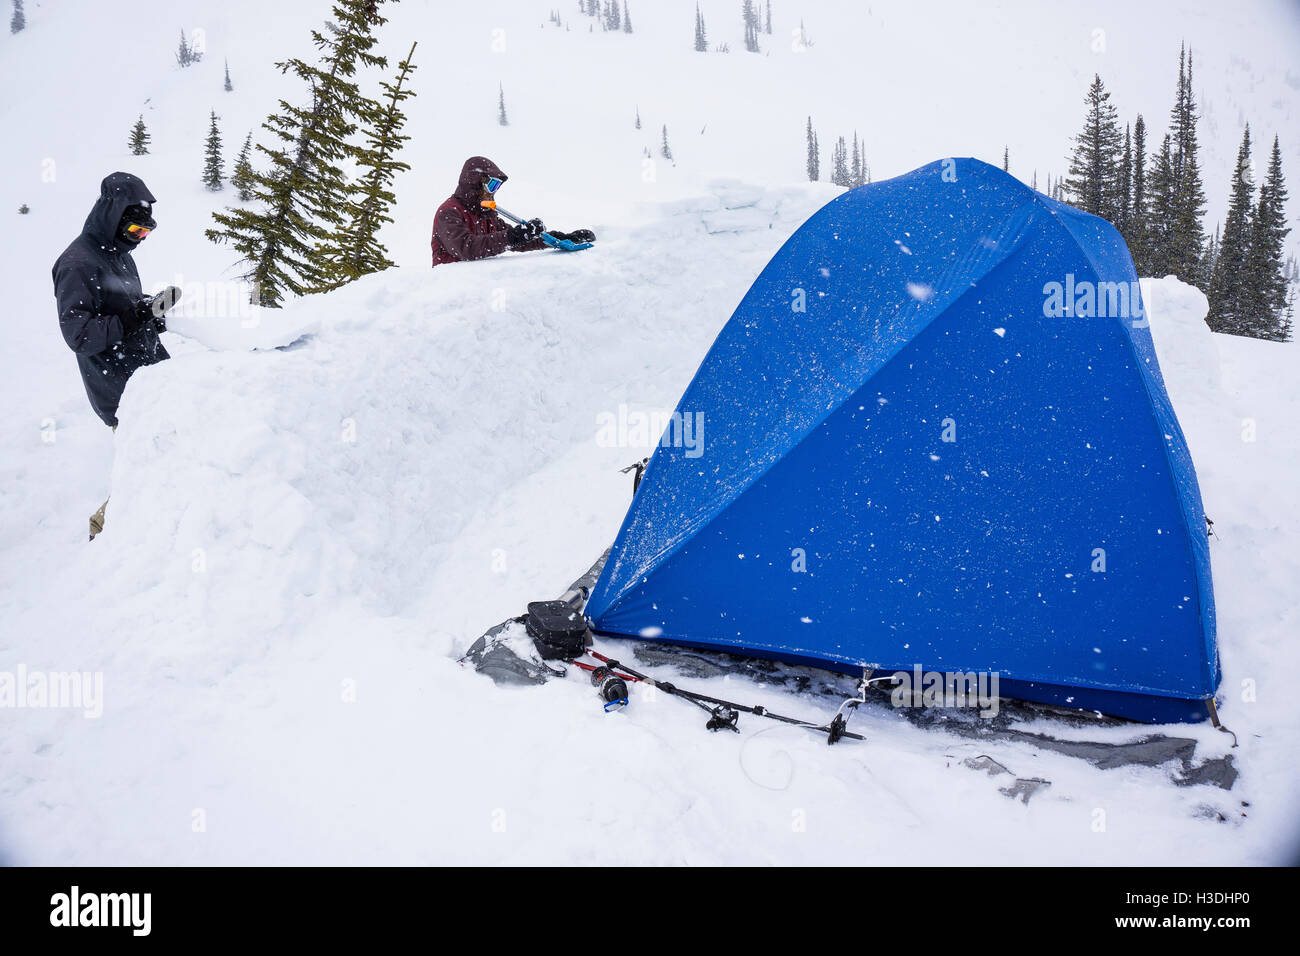 Building snow walls to protect tent during winter expedition Stock Photo